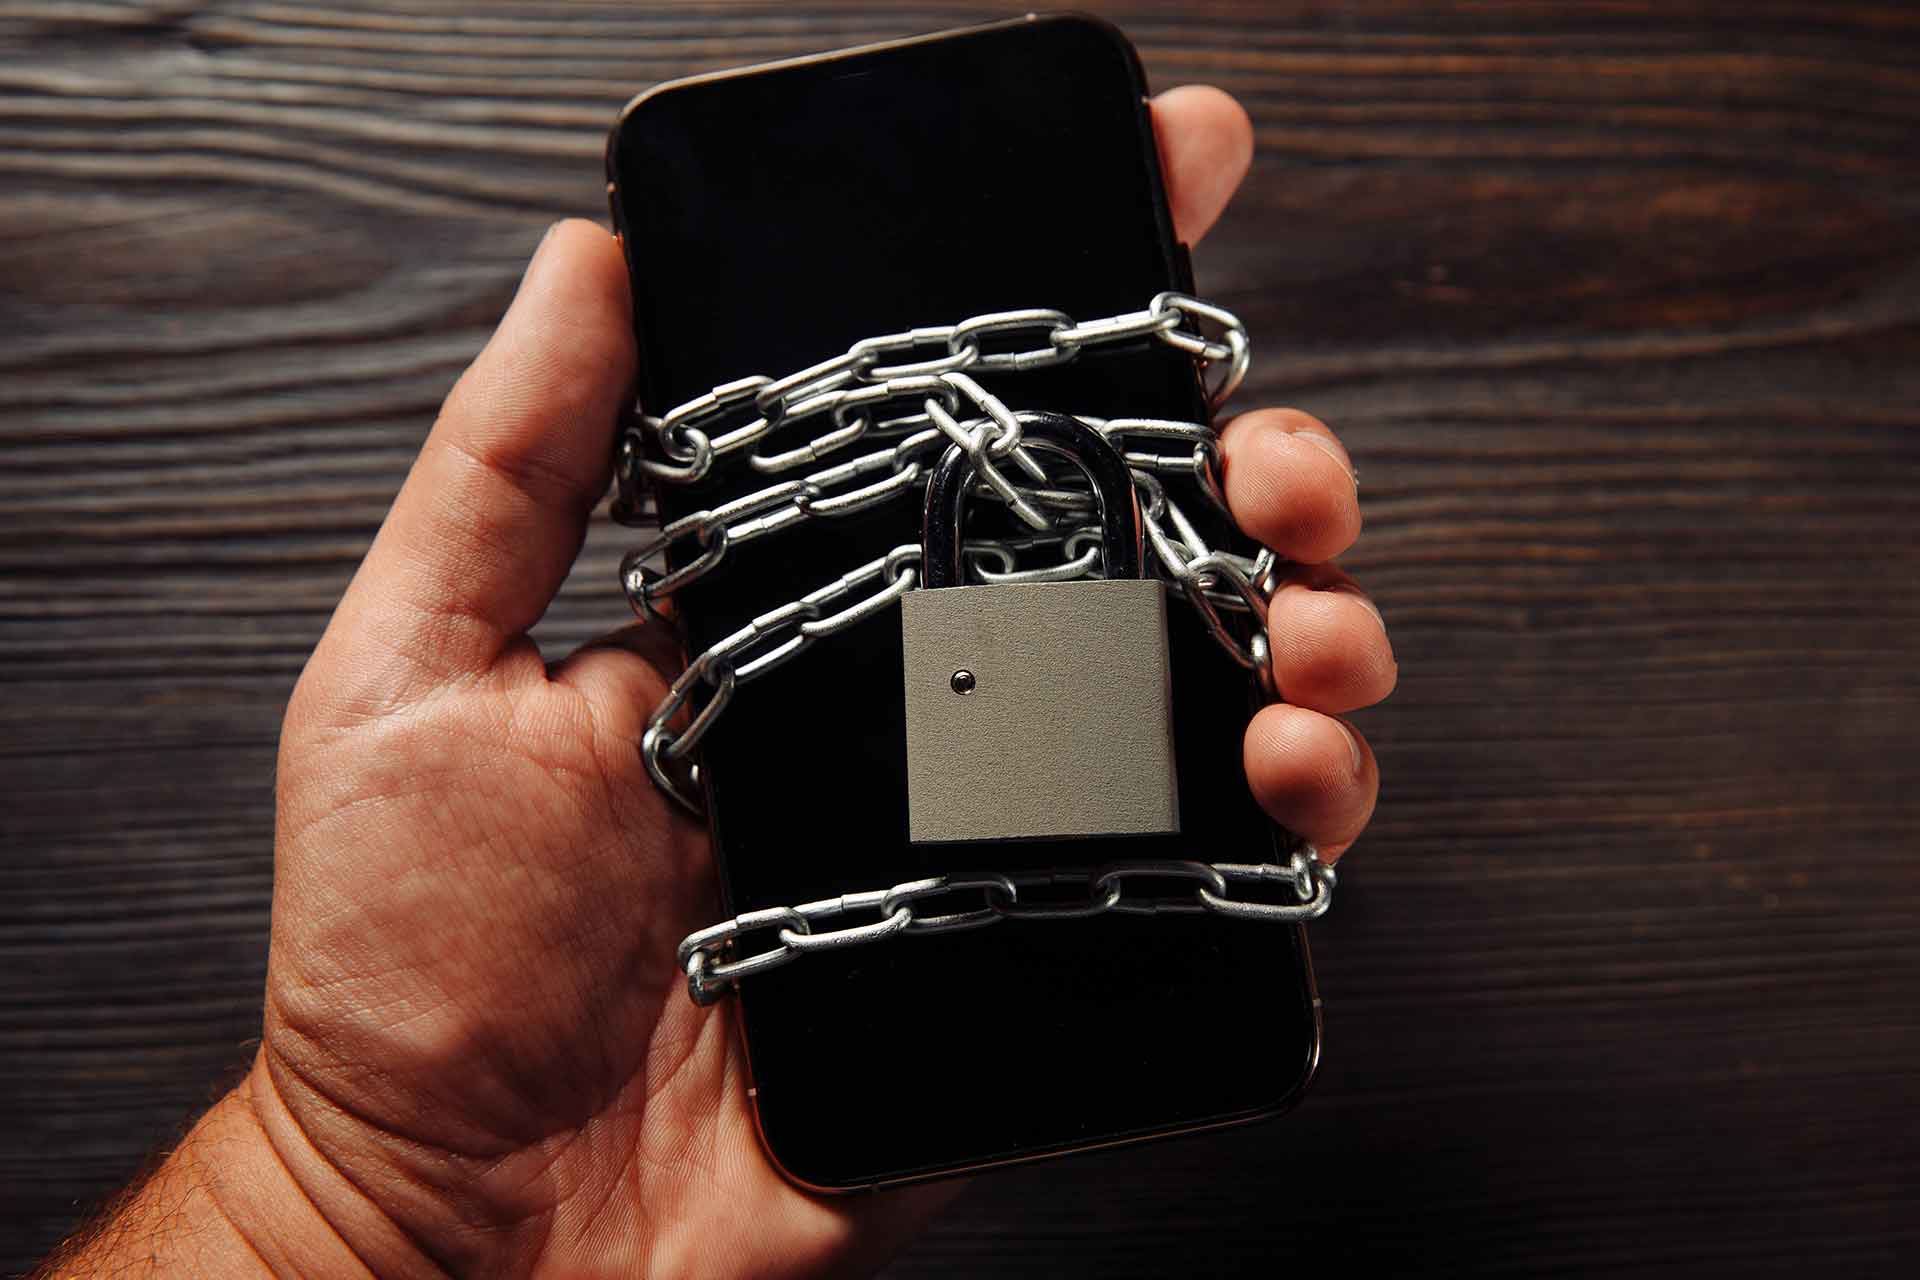 man-s-hand-holding-smartphone-with-padlock-concept-smartphone-protection-against-malware-antivirus